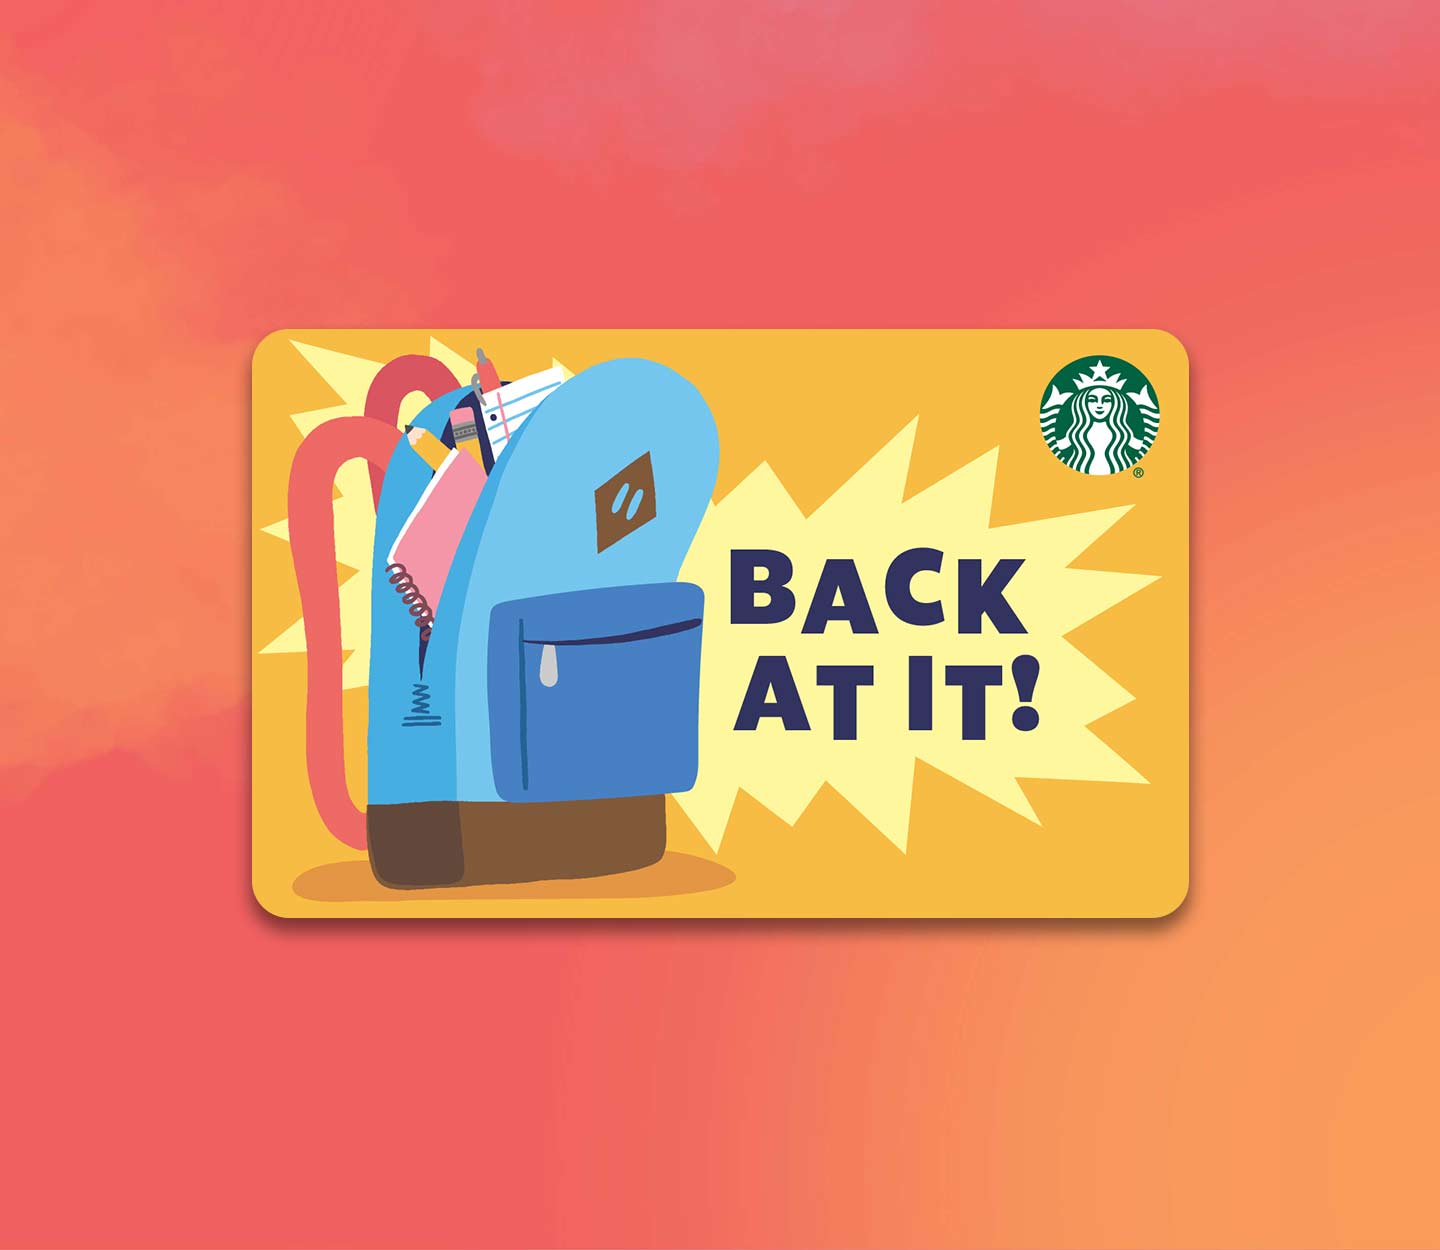 Gift card with an illustrated backpack and “BACK AT IT!” message.